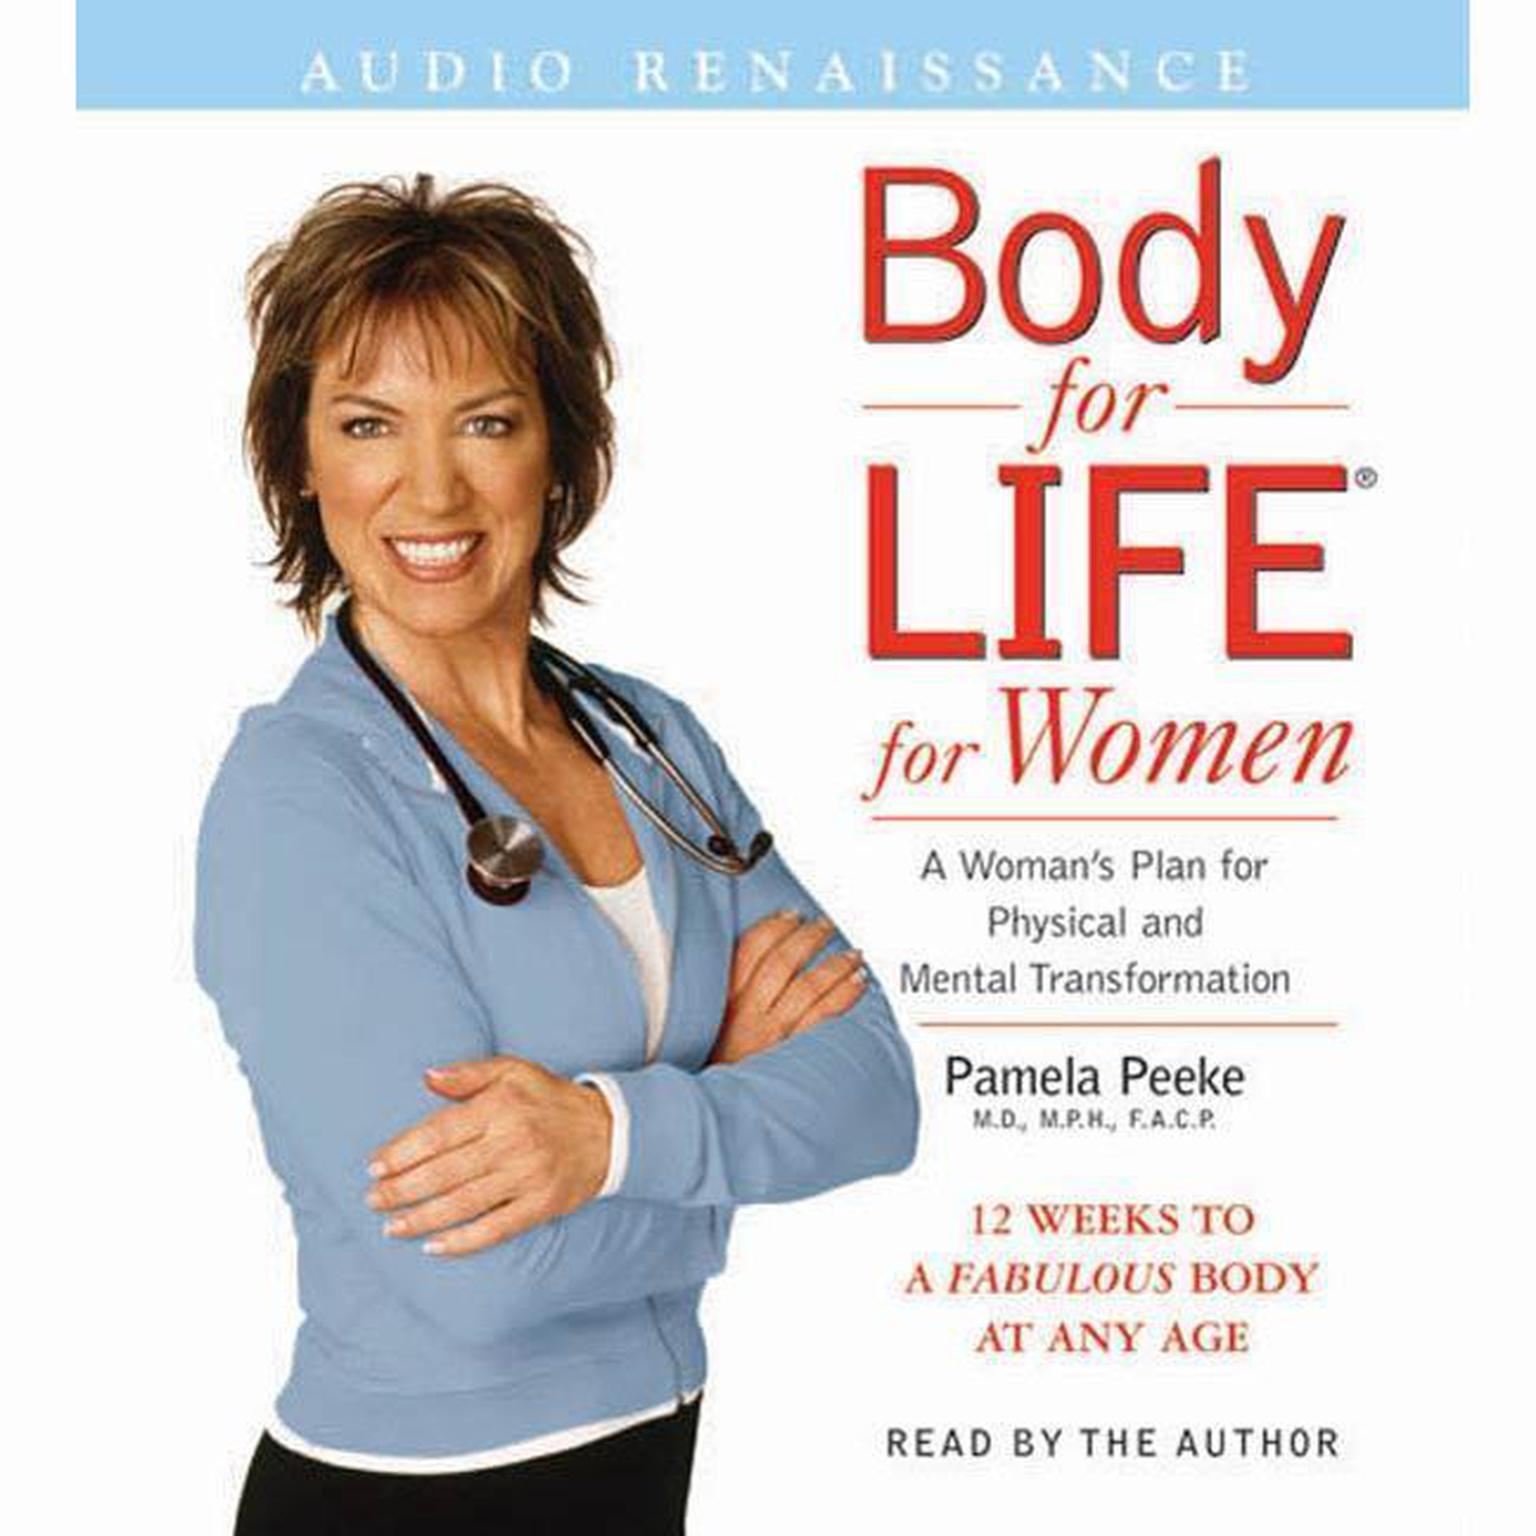 Body for Life for Women (Abridged): 12 Weeks to a Firm, Fit, Fabulous Body at Any Age Audiobook, by Pamela Peeke